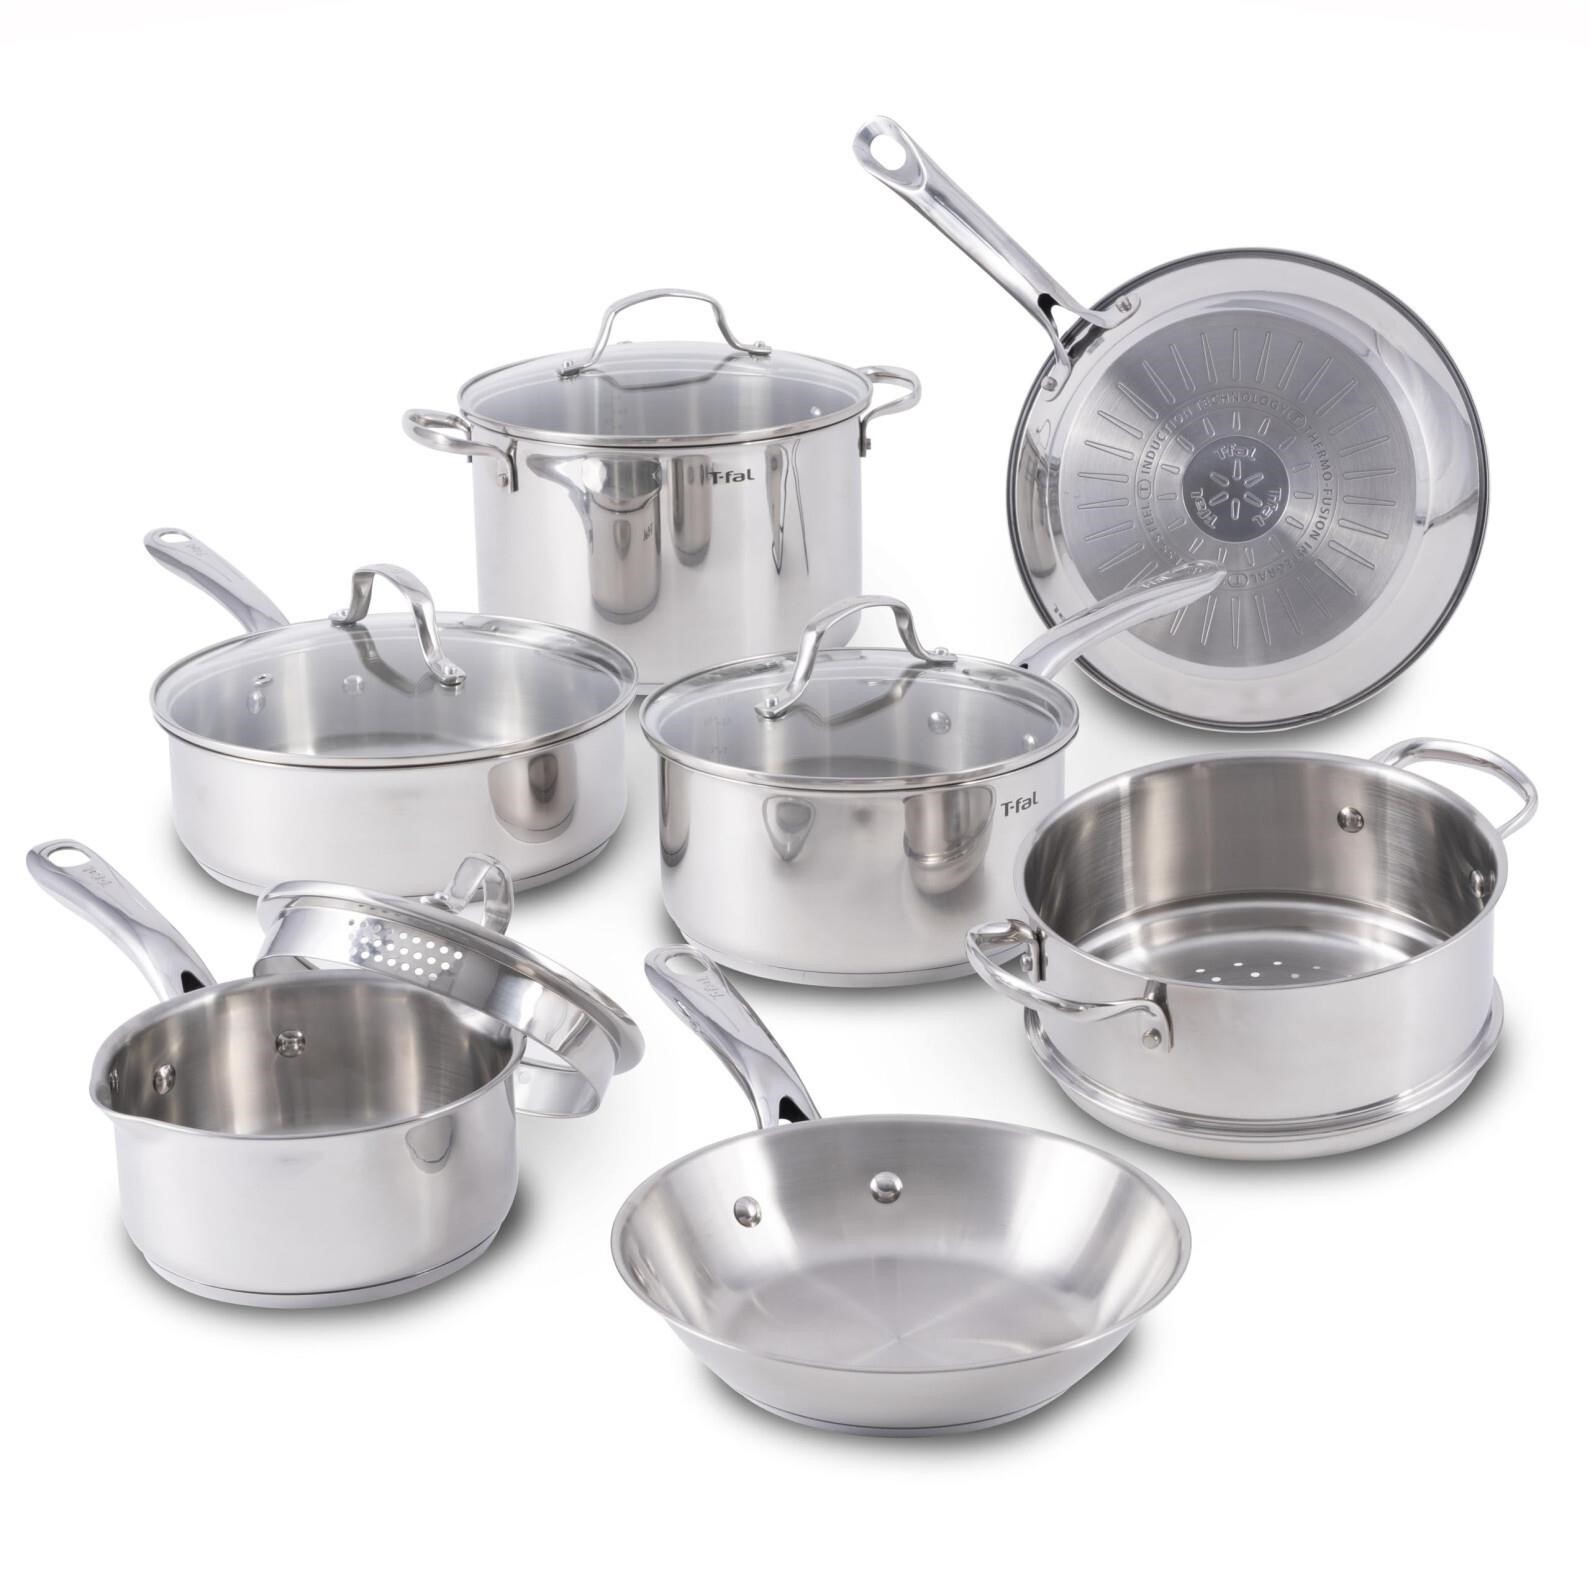 T-fal Stainless Steel Cookware Set 11 Piece, Induc